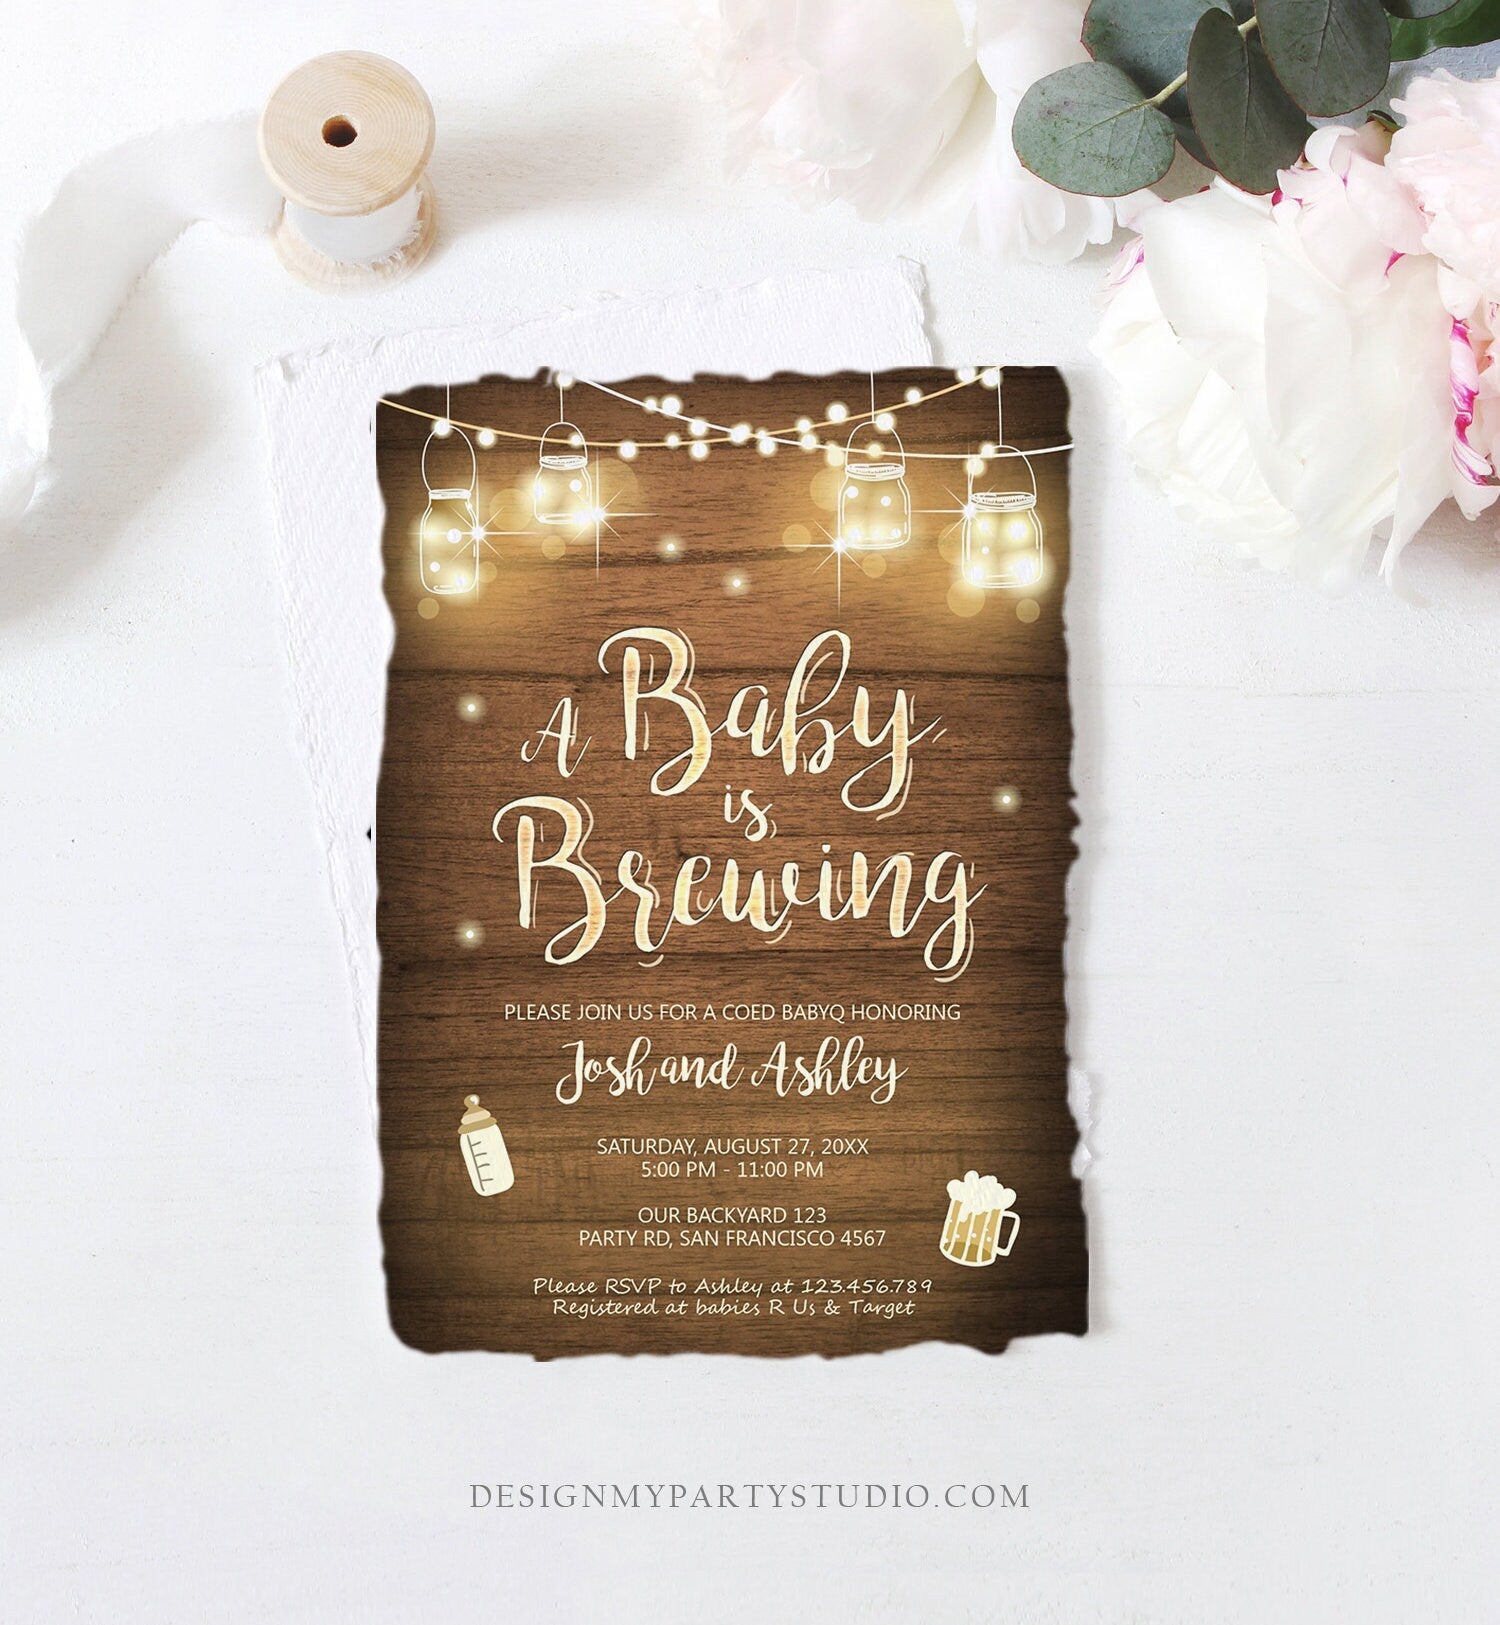 Editable A Baby is Brewing Invitation Bottle and Beers Baby Shower BaByQ BBQ Coed Couples Shower Wood Download Printable Template Corjl 0015